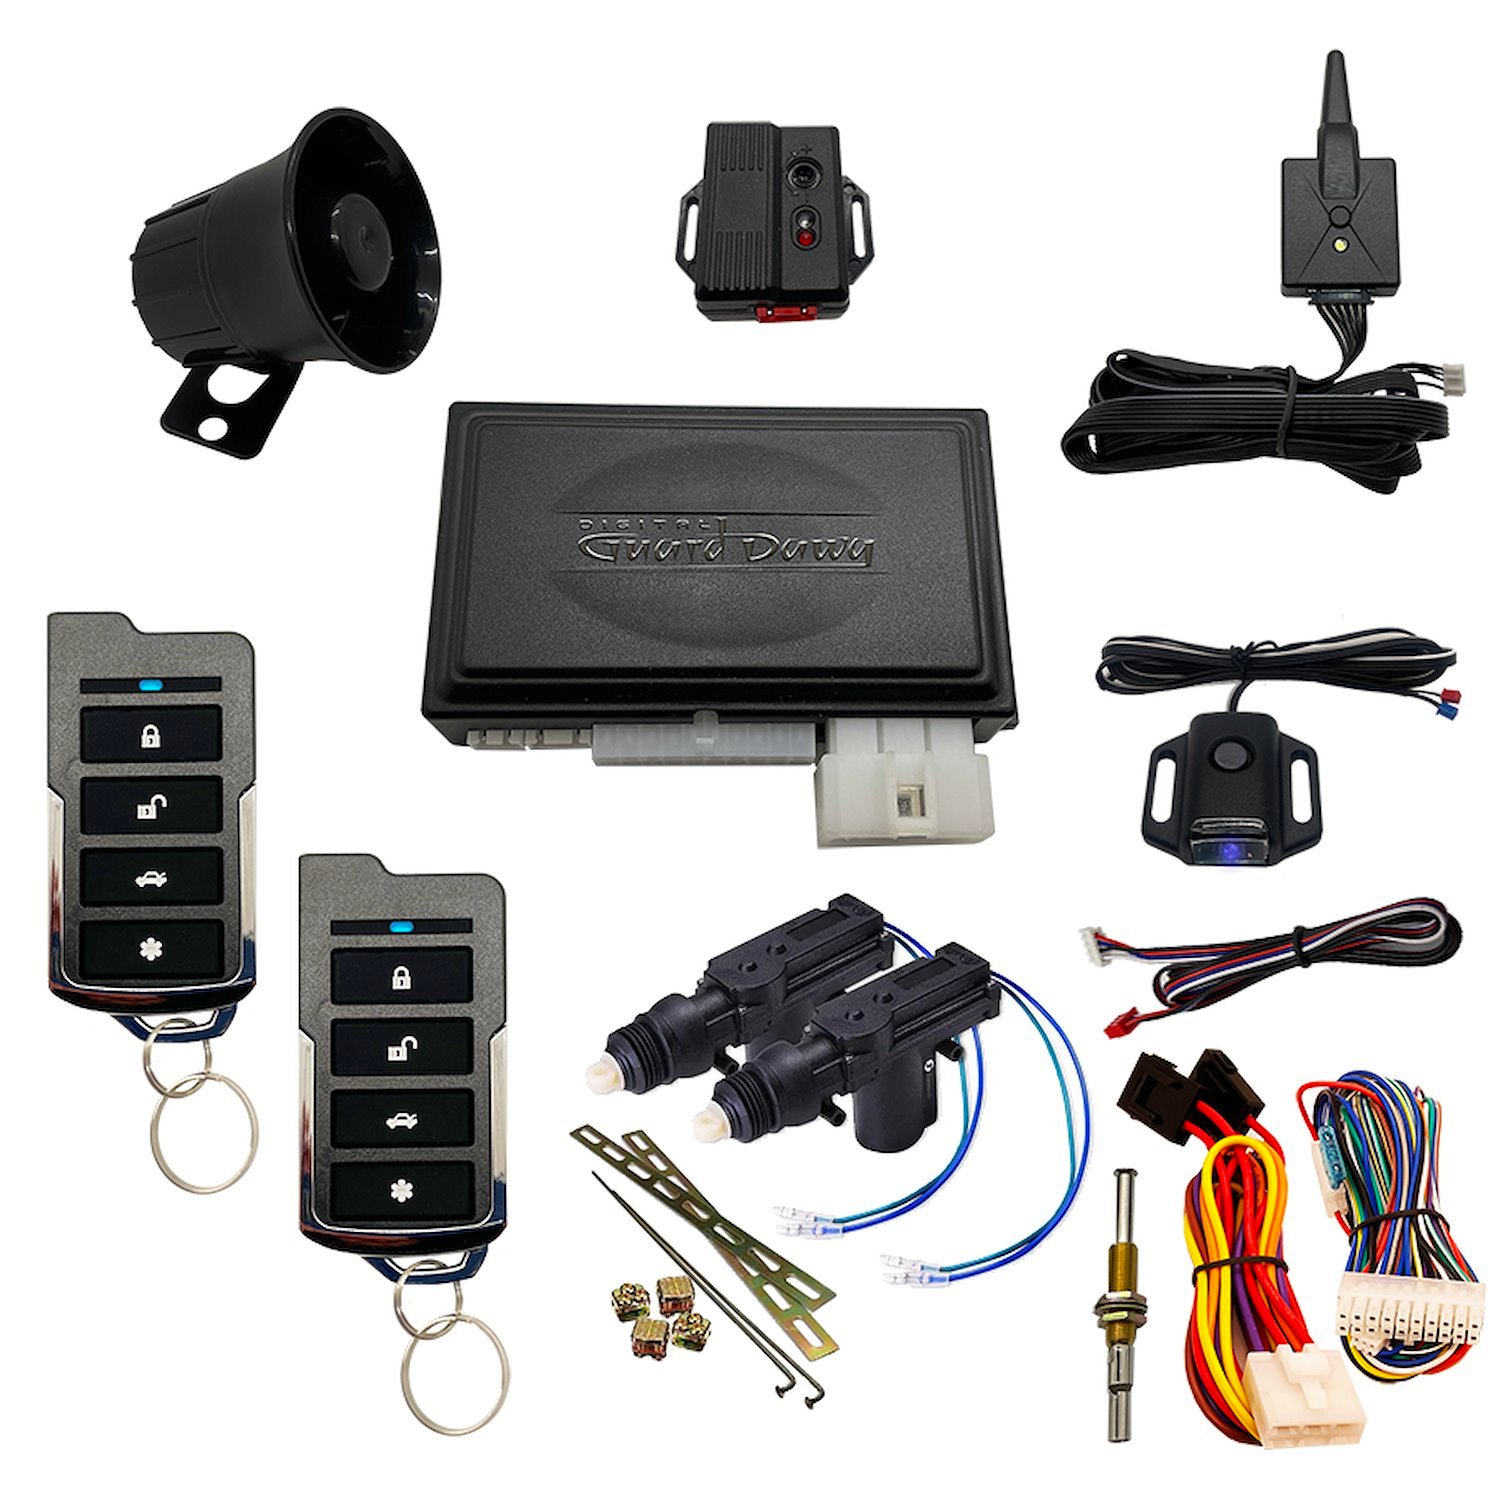 DGD-KY-ALM-RS1-2A Keyless Entry, Alarm System, and Remote Start, 1-Way w/2-Door Actuator Kit